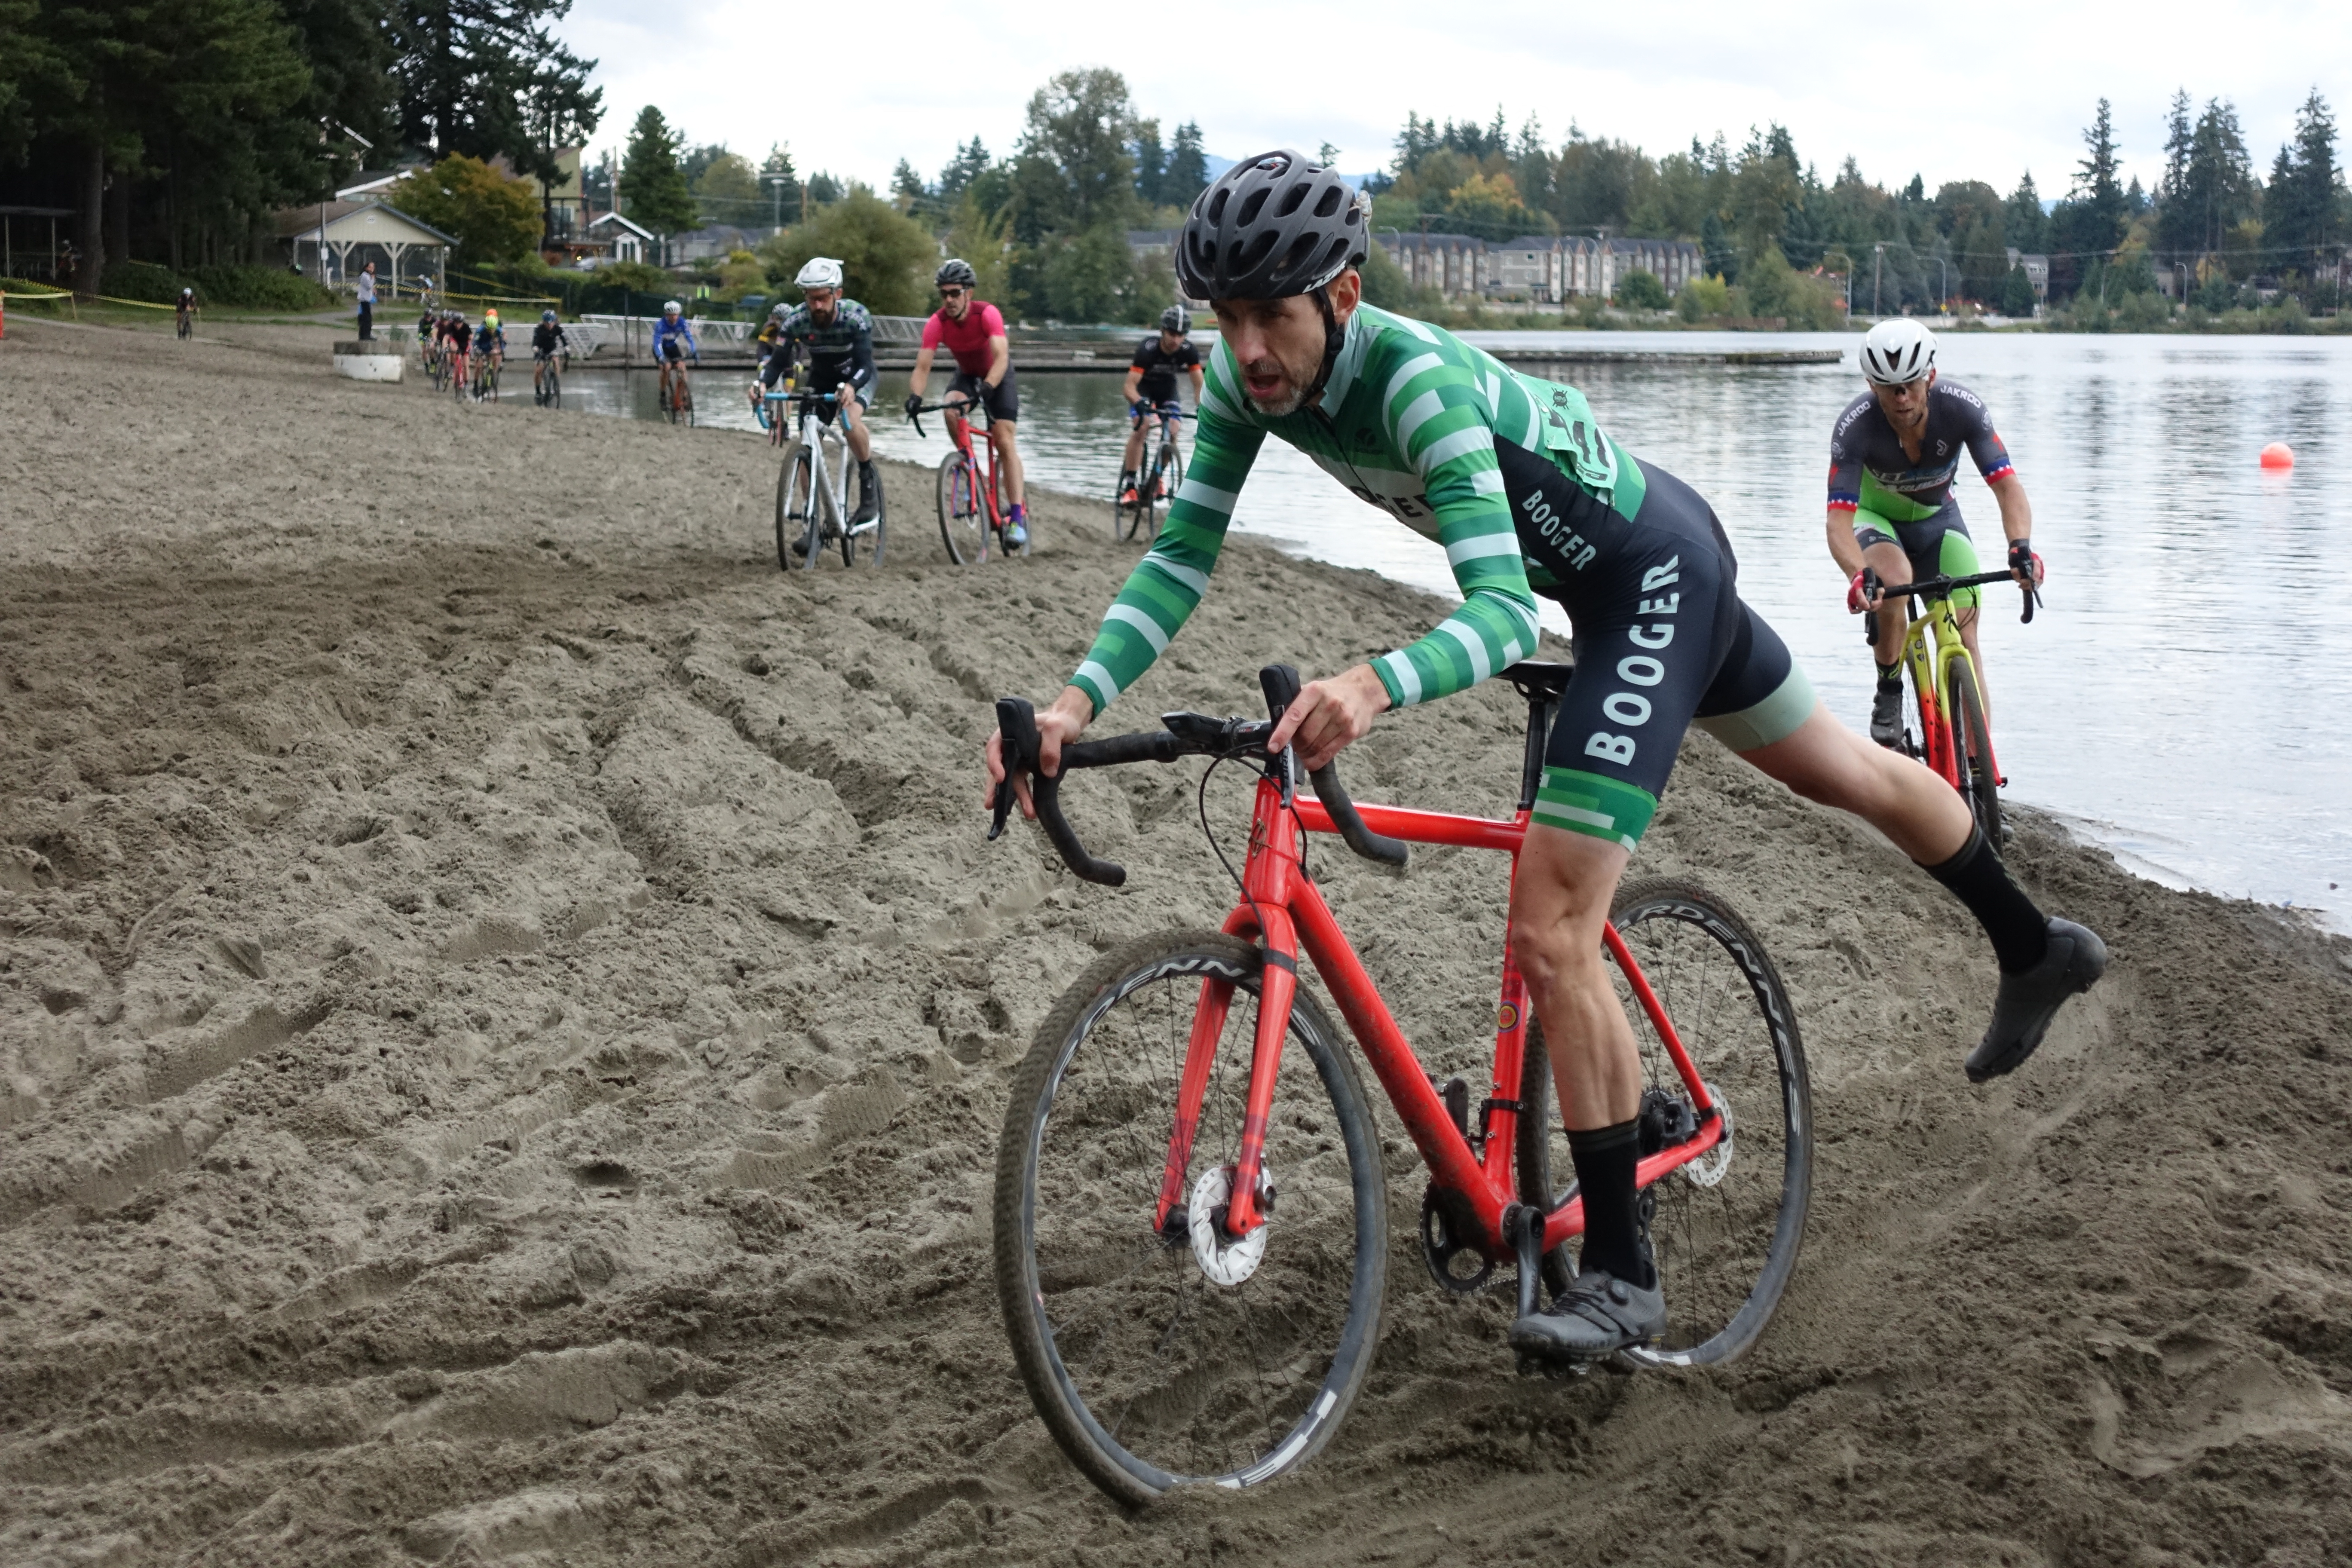 This racer took the low line and dismounted just before exiting the beach.